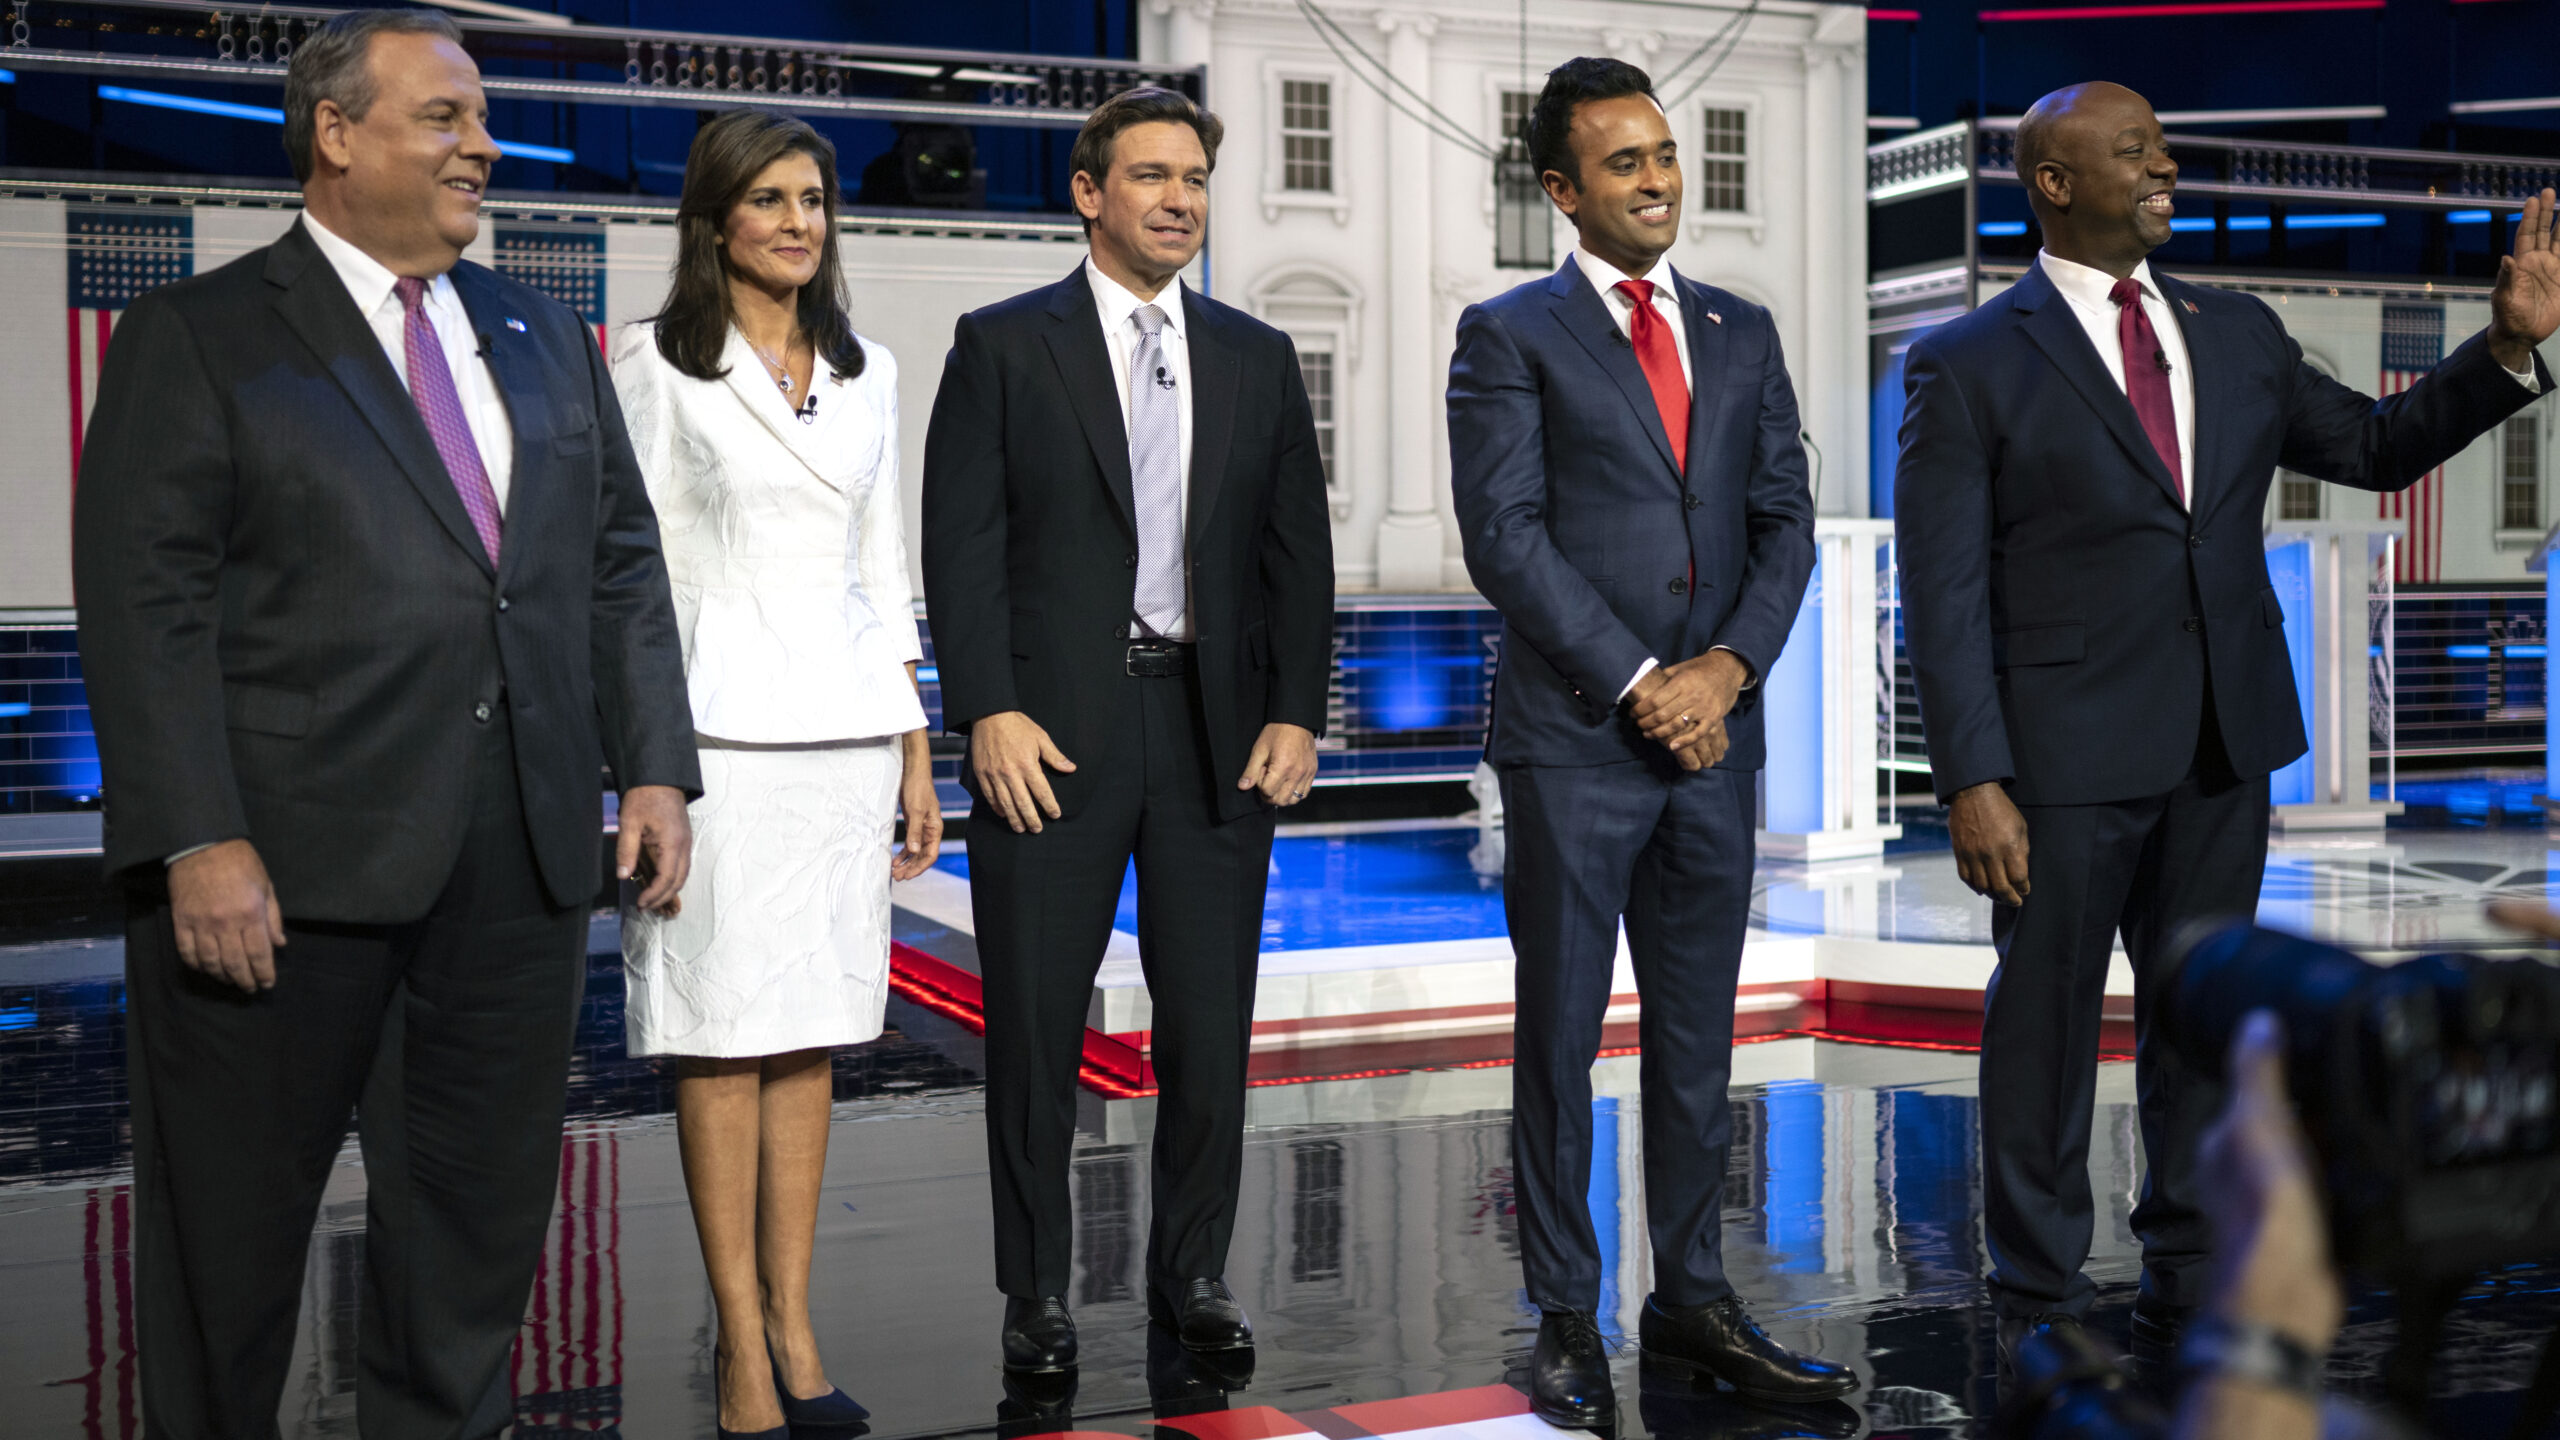 GOP Candidates Weigh In On Where They Stand With Abortion